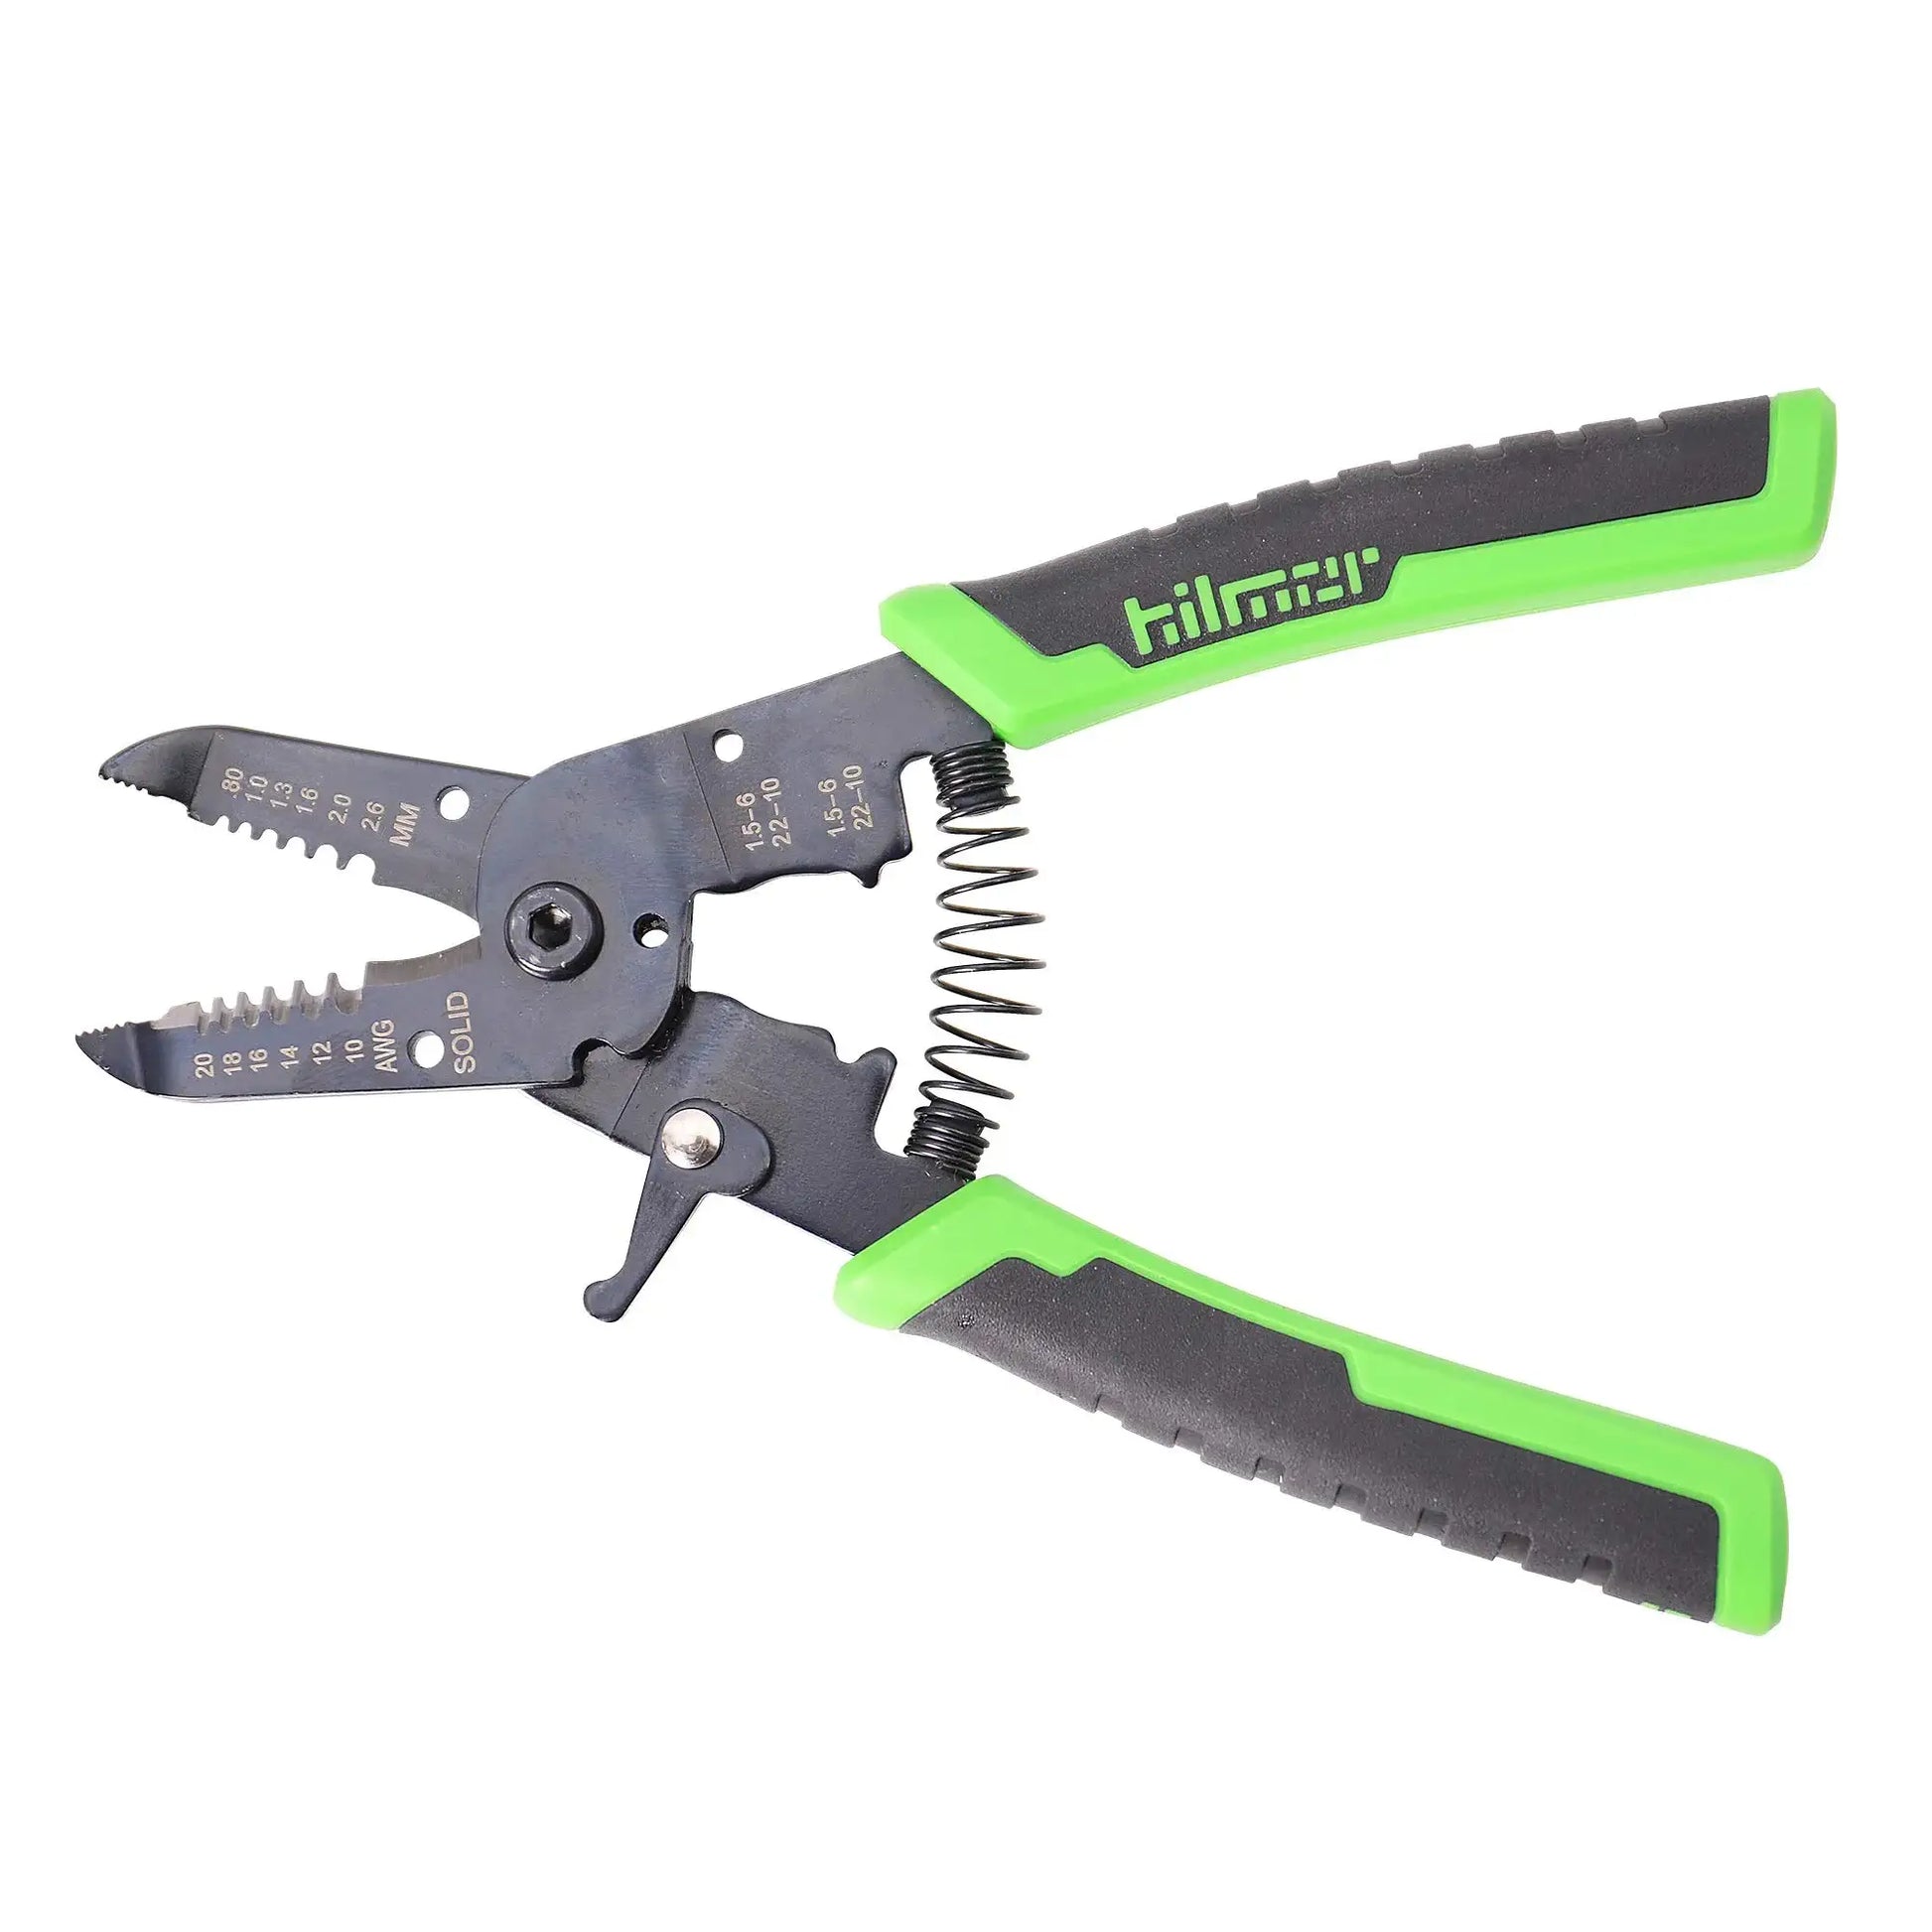 Hilmor 7 Wire Stripper with Rubber Handle Grip, Black & Green, WS7 1885426 Second